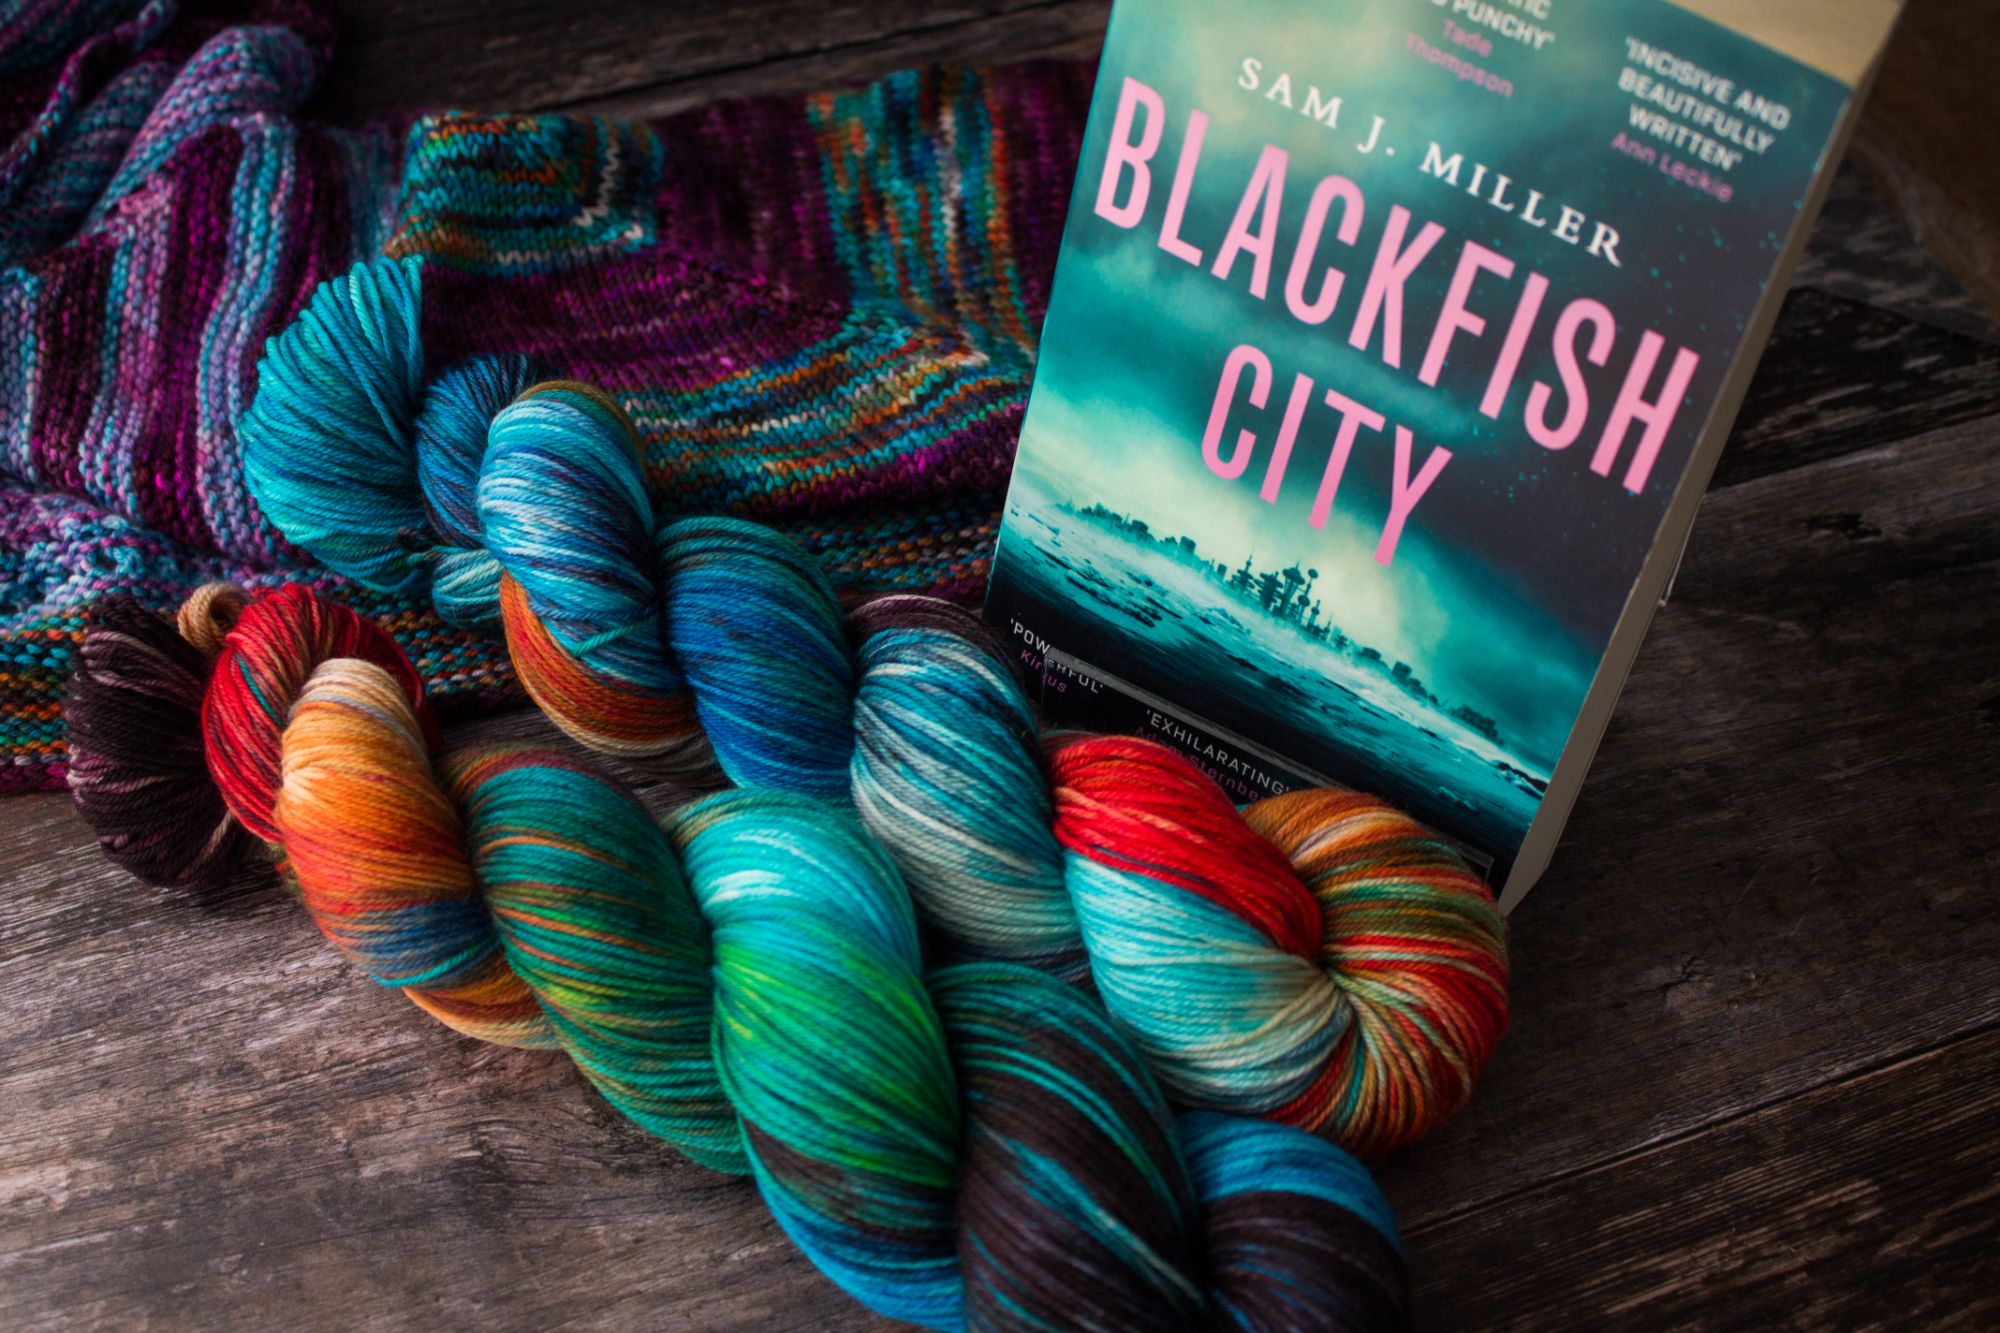 2 skeins of variegated blue teal, orange and deep plum in the foreground, with the book BlackFish City and knitting in the background